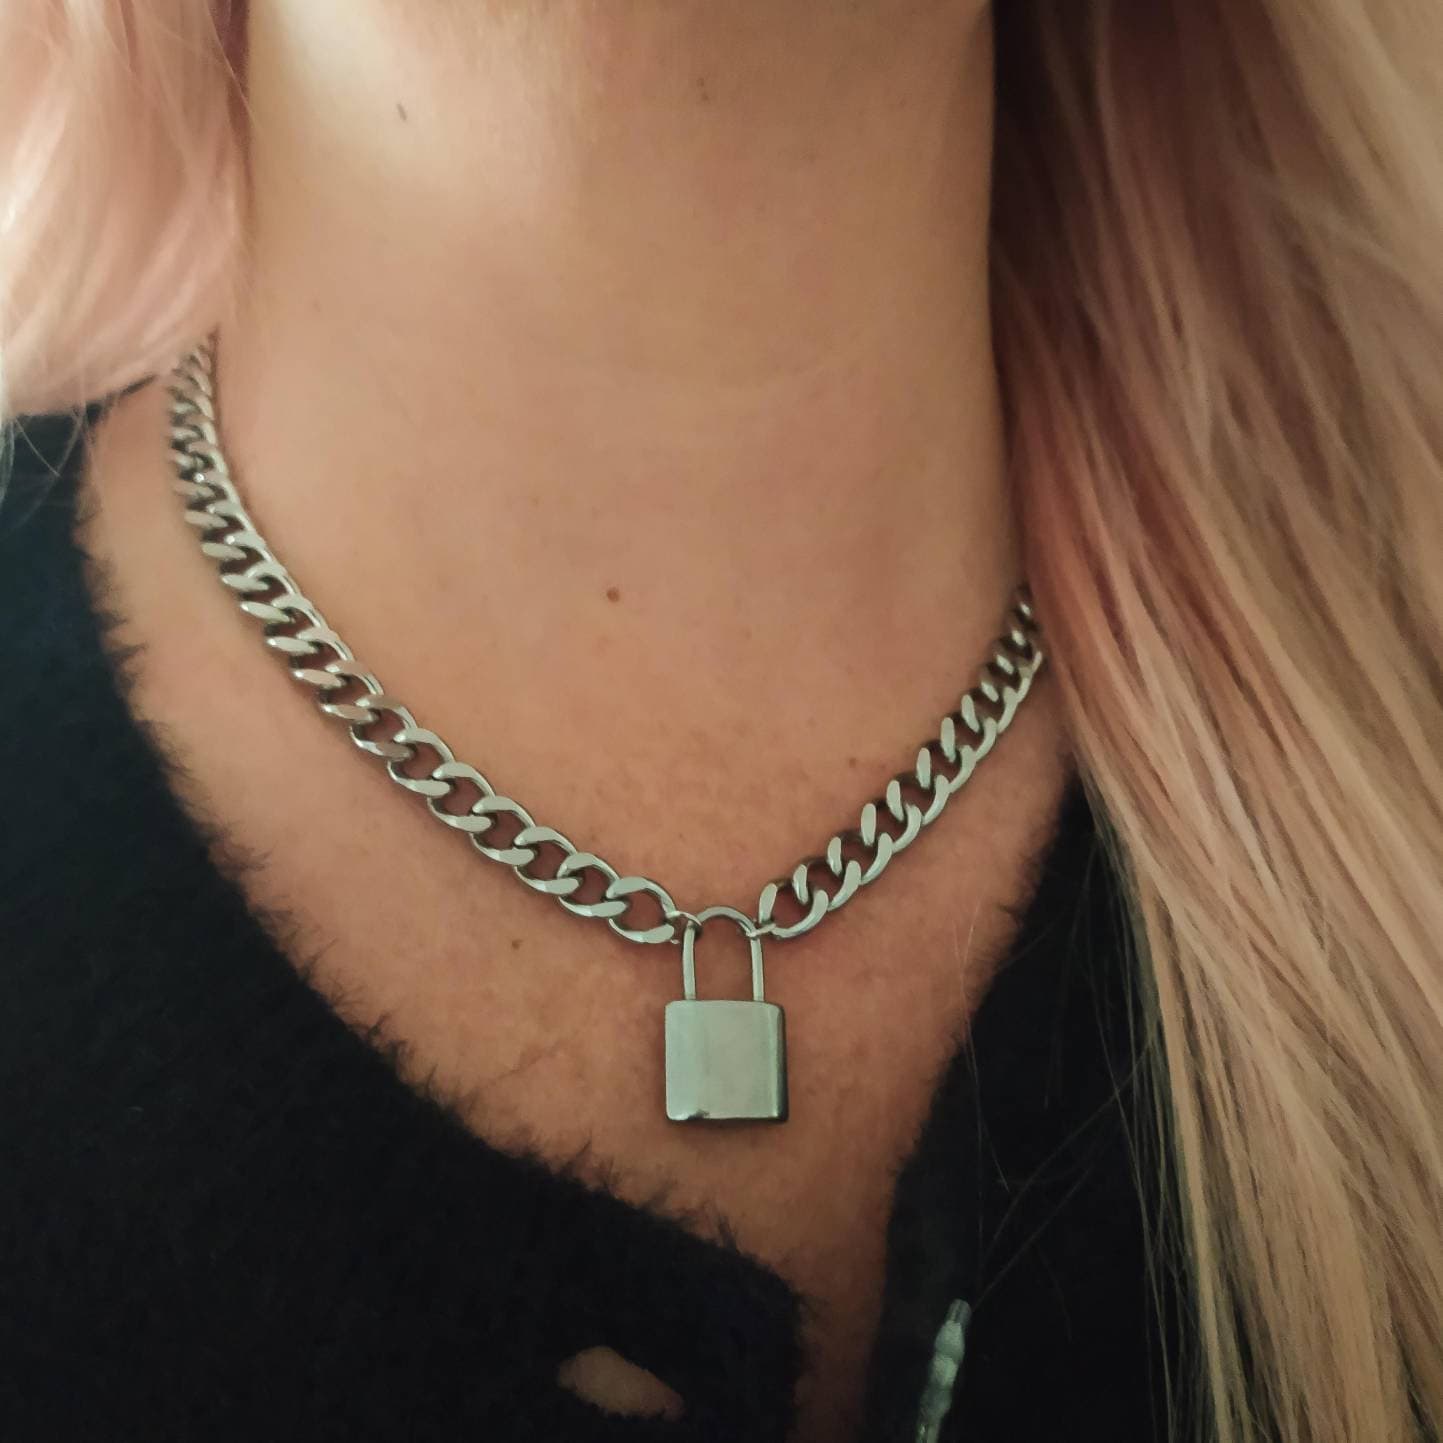 Stainless Steel Louis Functional Lock Necklace